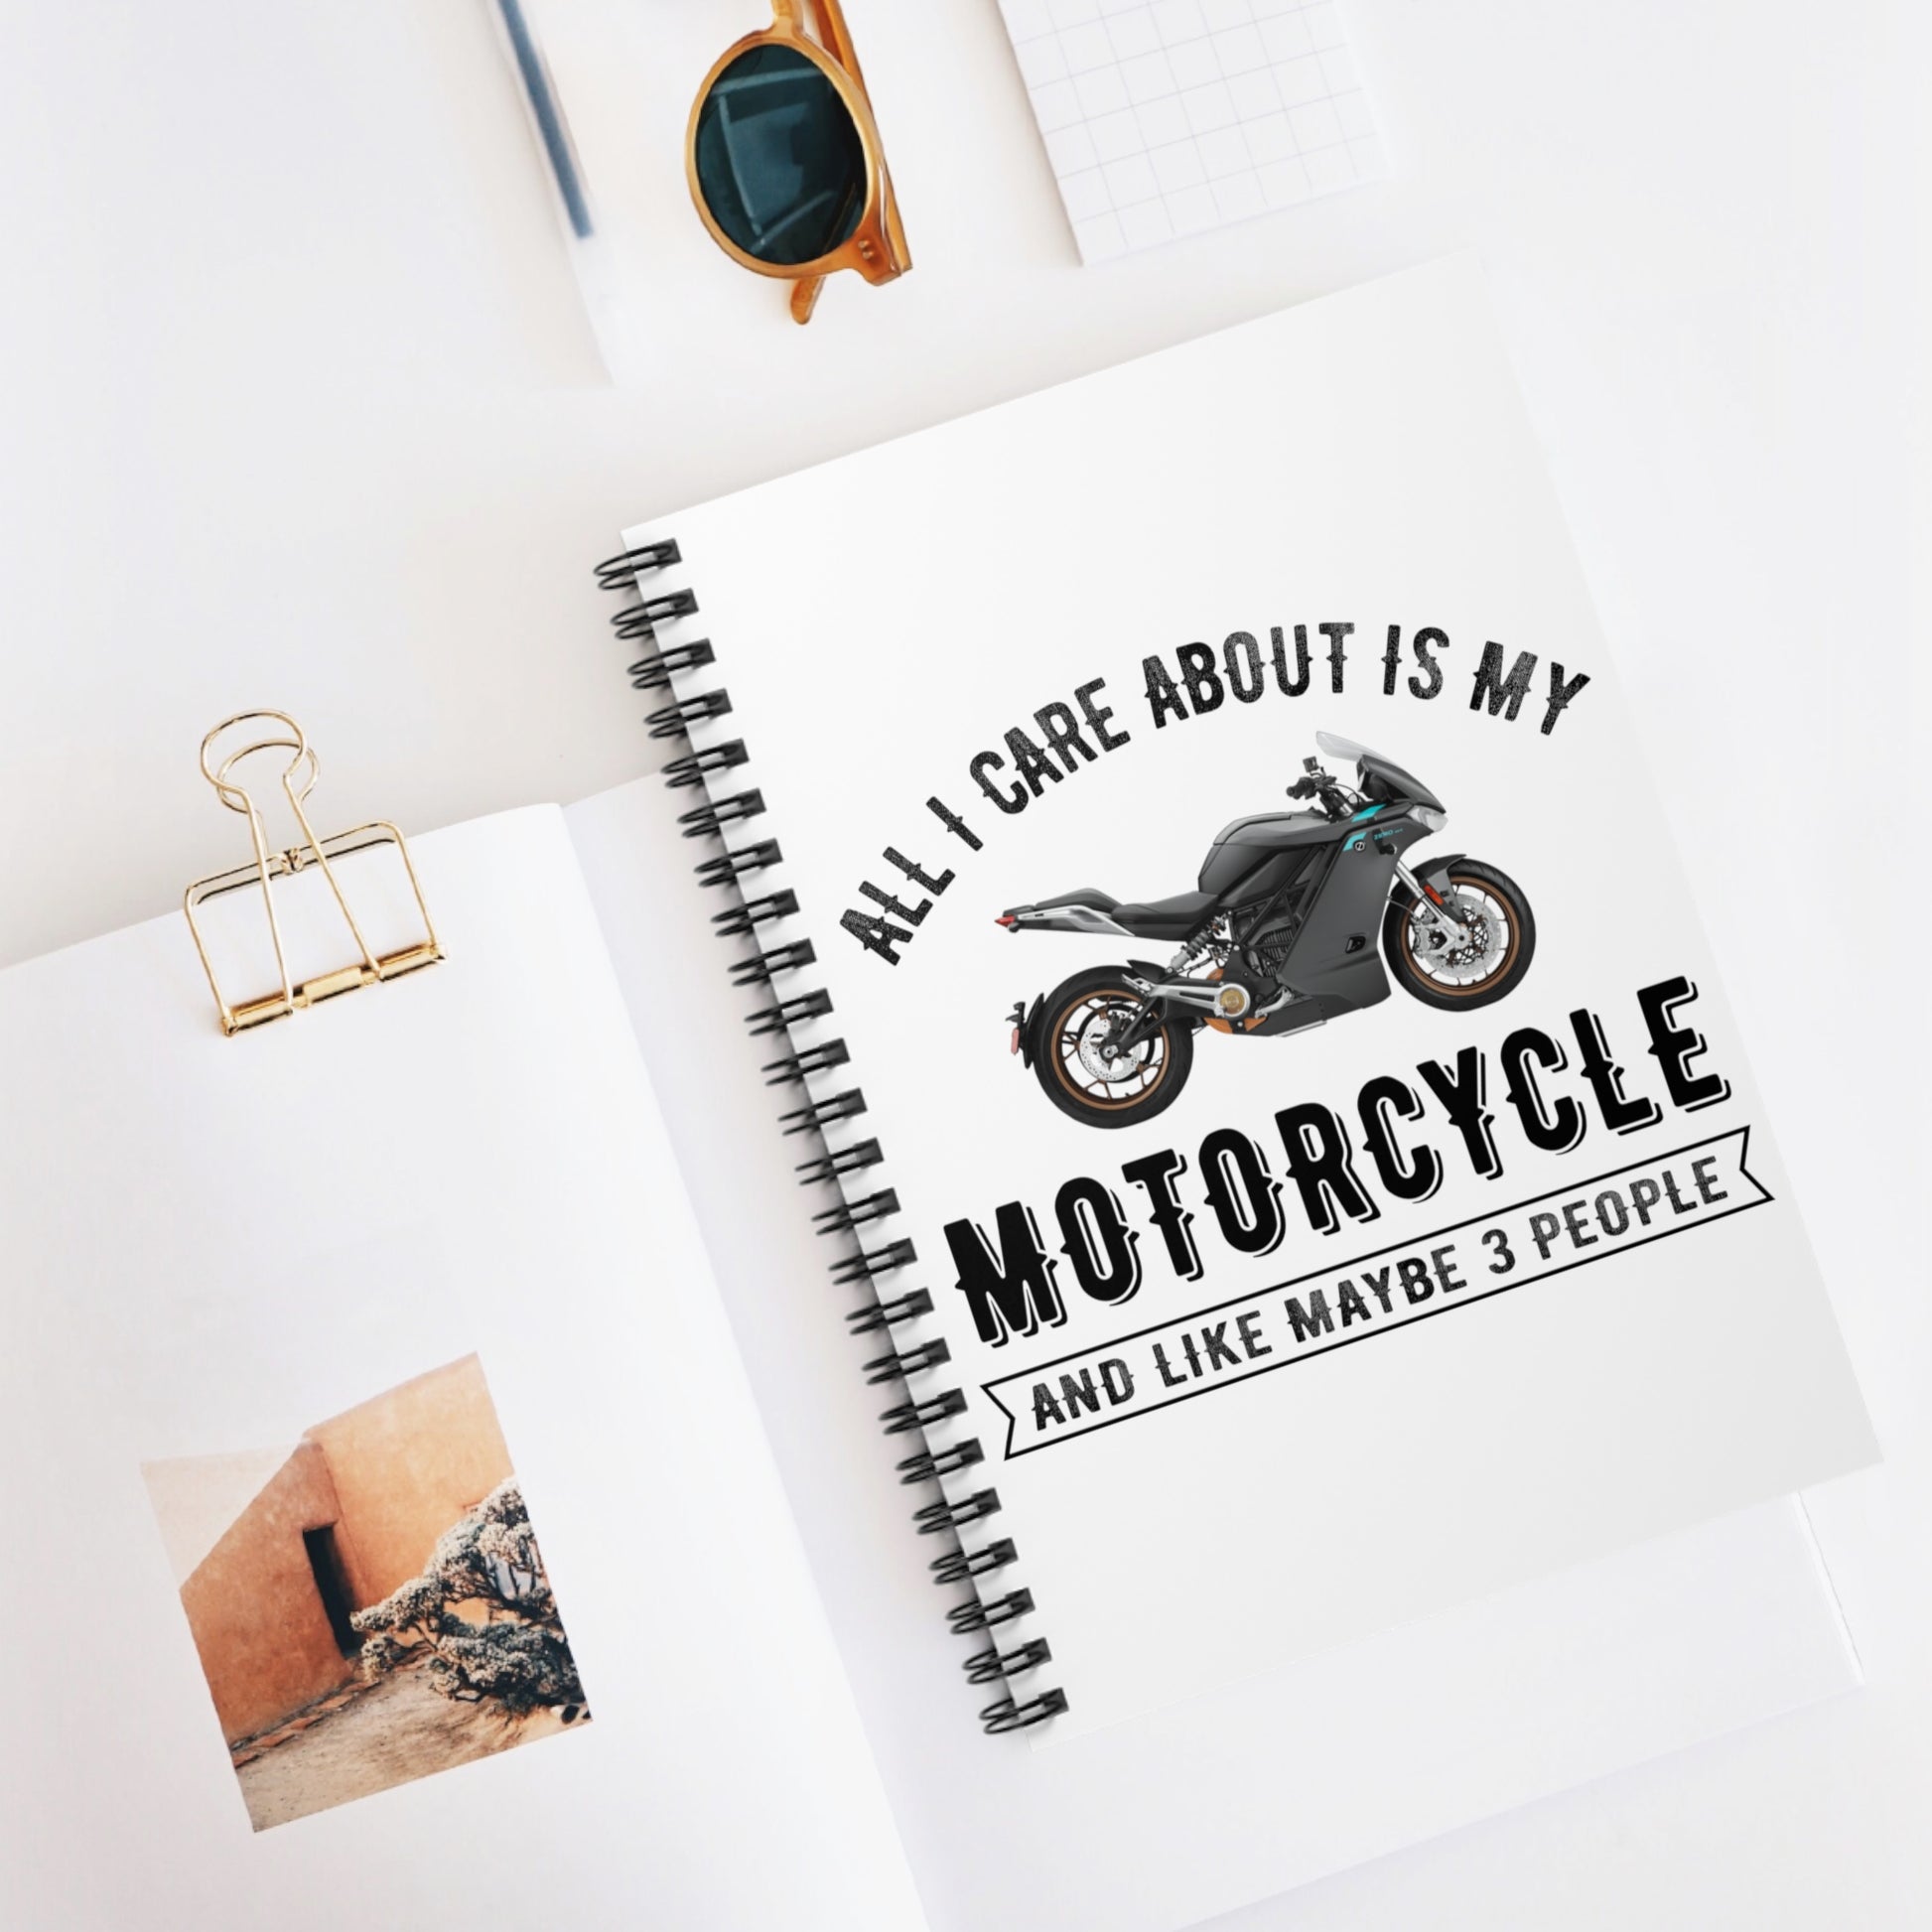 Motorcycle Zen: Spiral Notebook - Log Books - Journals - Diaries - and More Custom Printed by TheGlassyLass